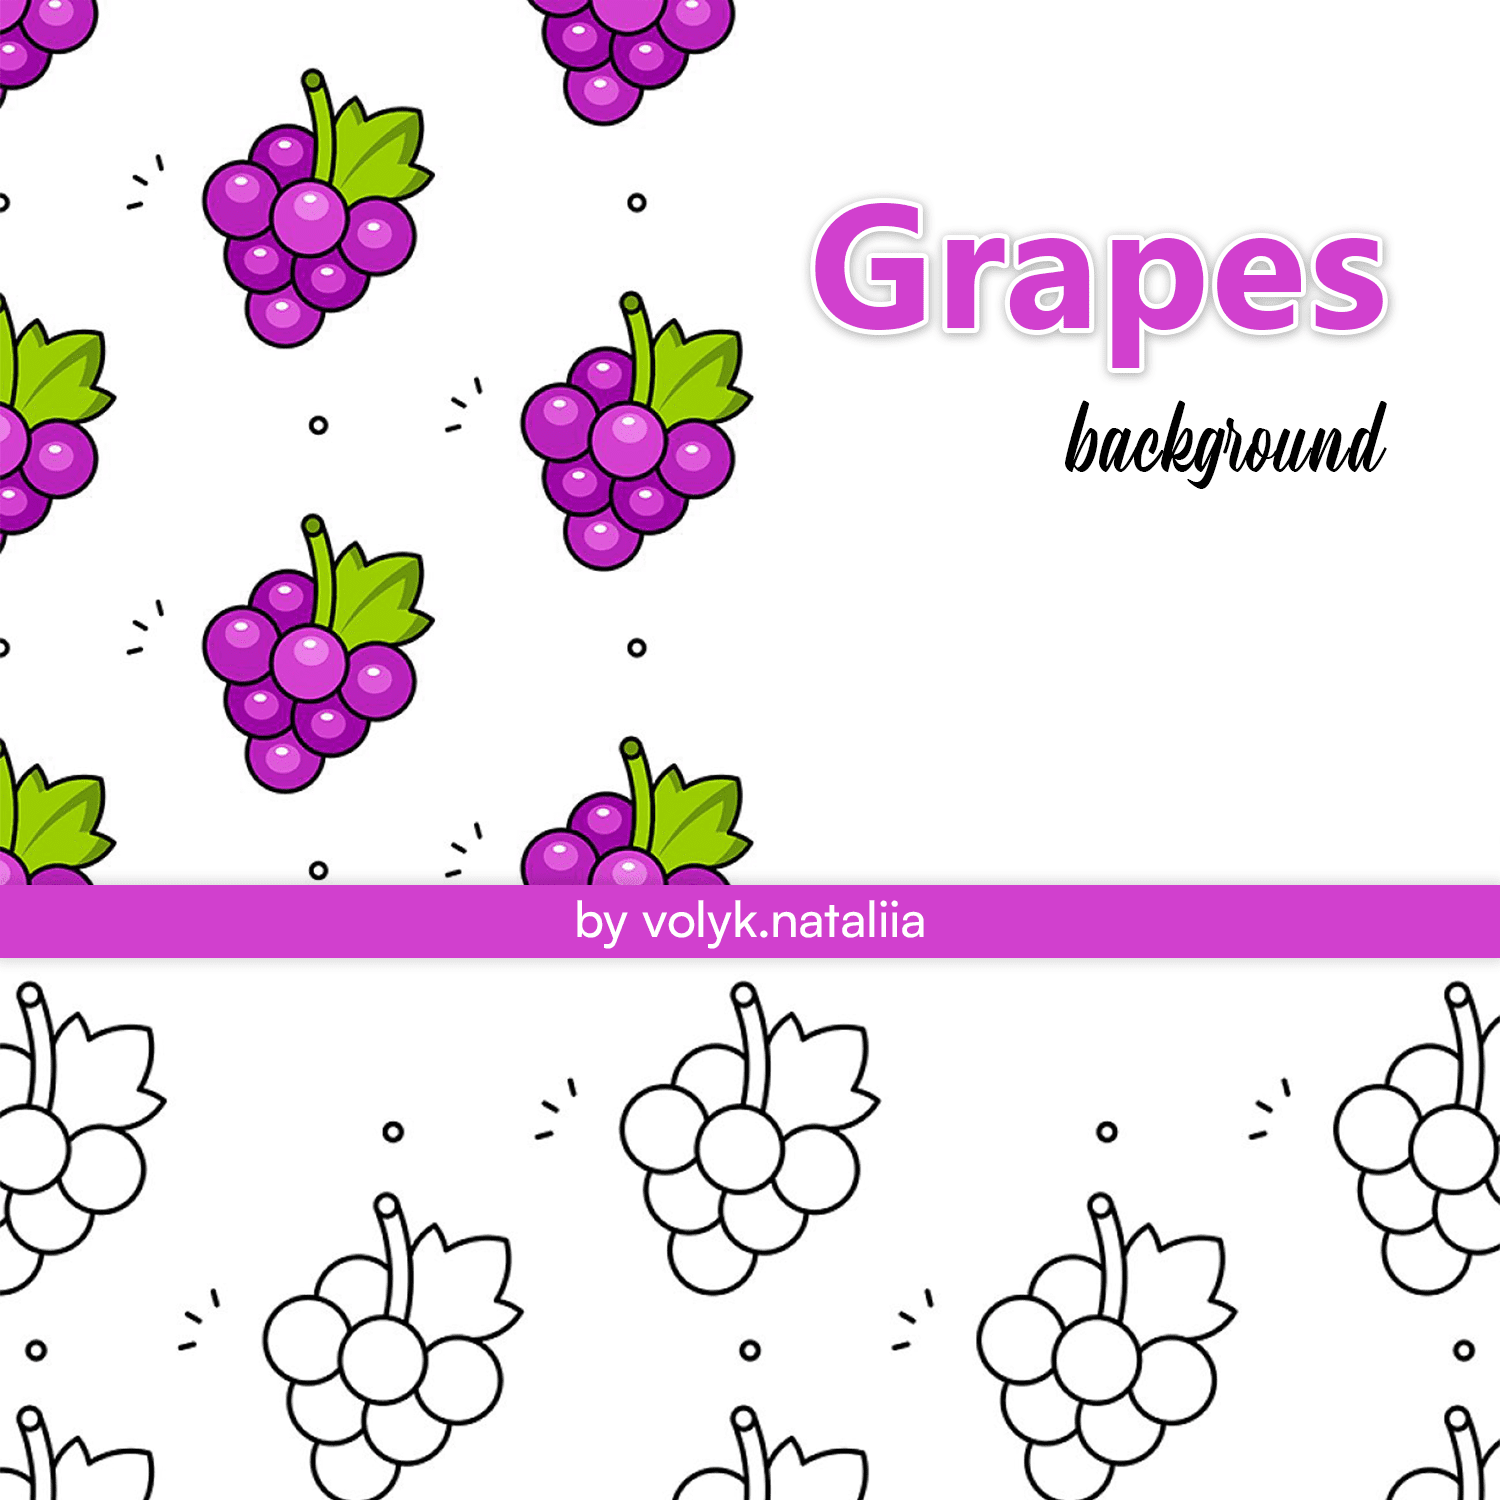 Grapes background created by volyk.nataliia.